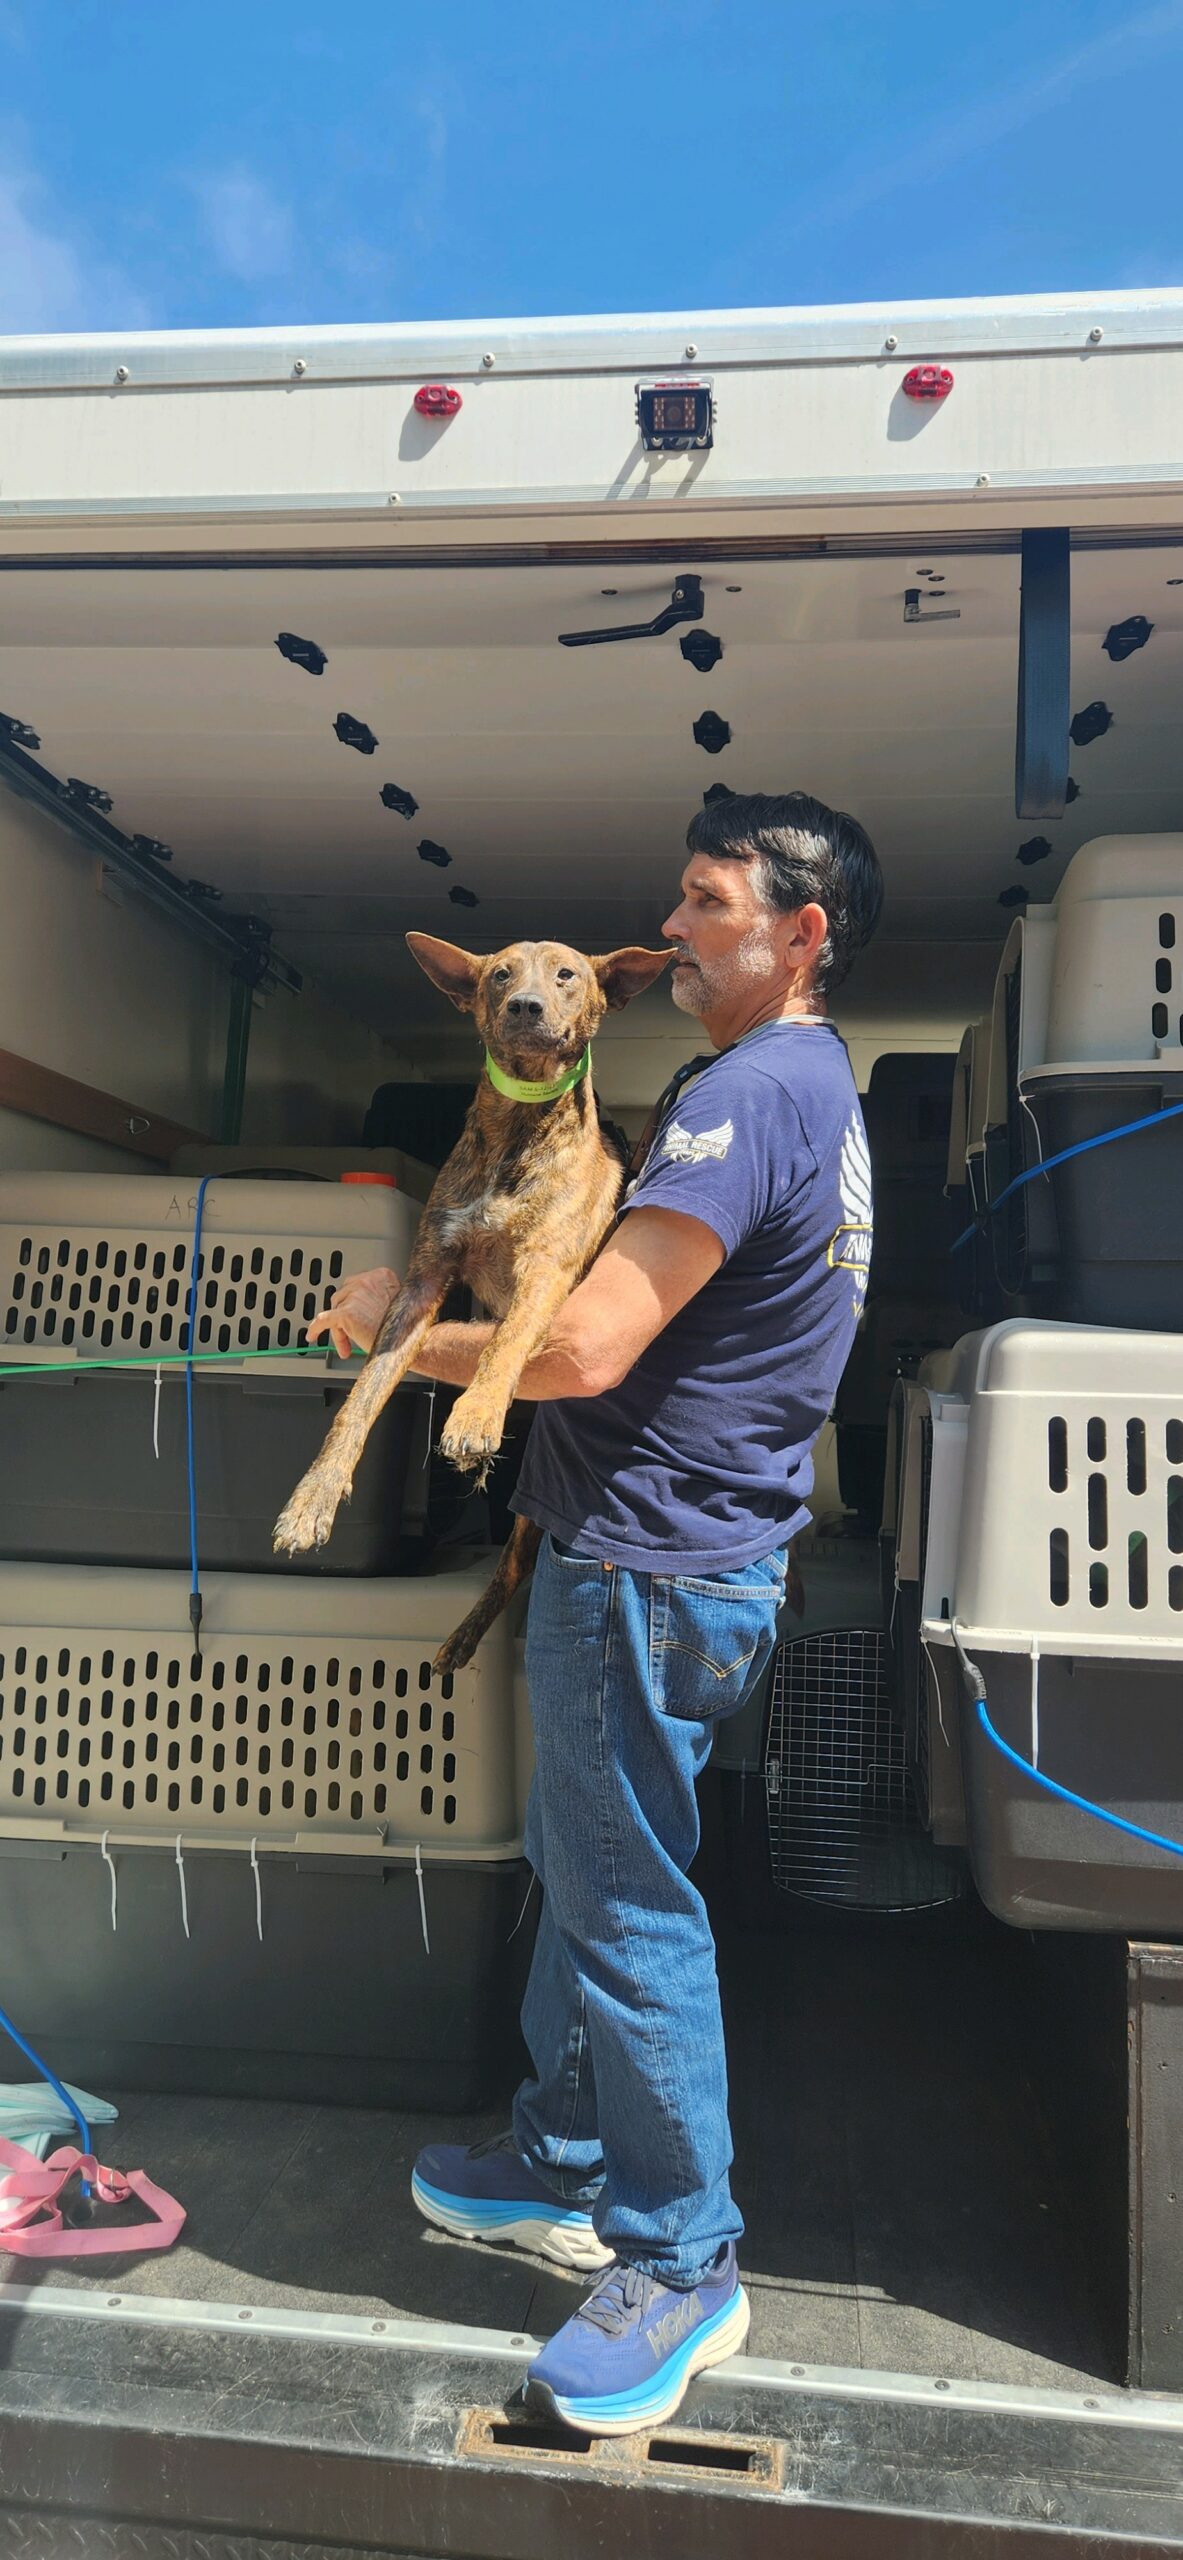 An ARC volunteer standing in the back of an ARC van holds a medium brown dog in his arms during the emergency rescue.